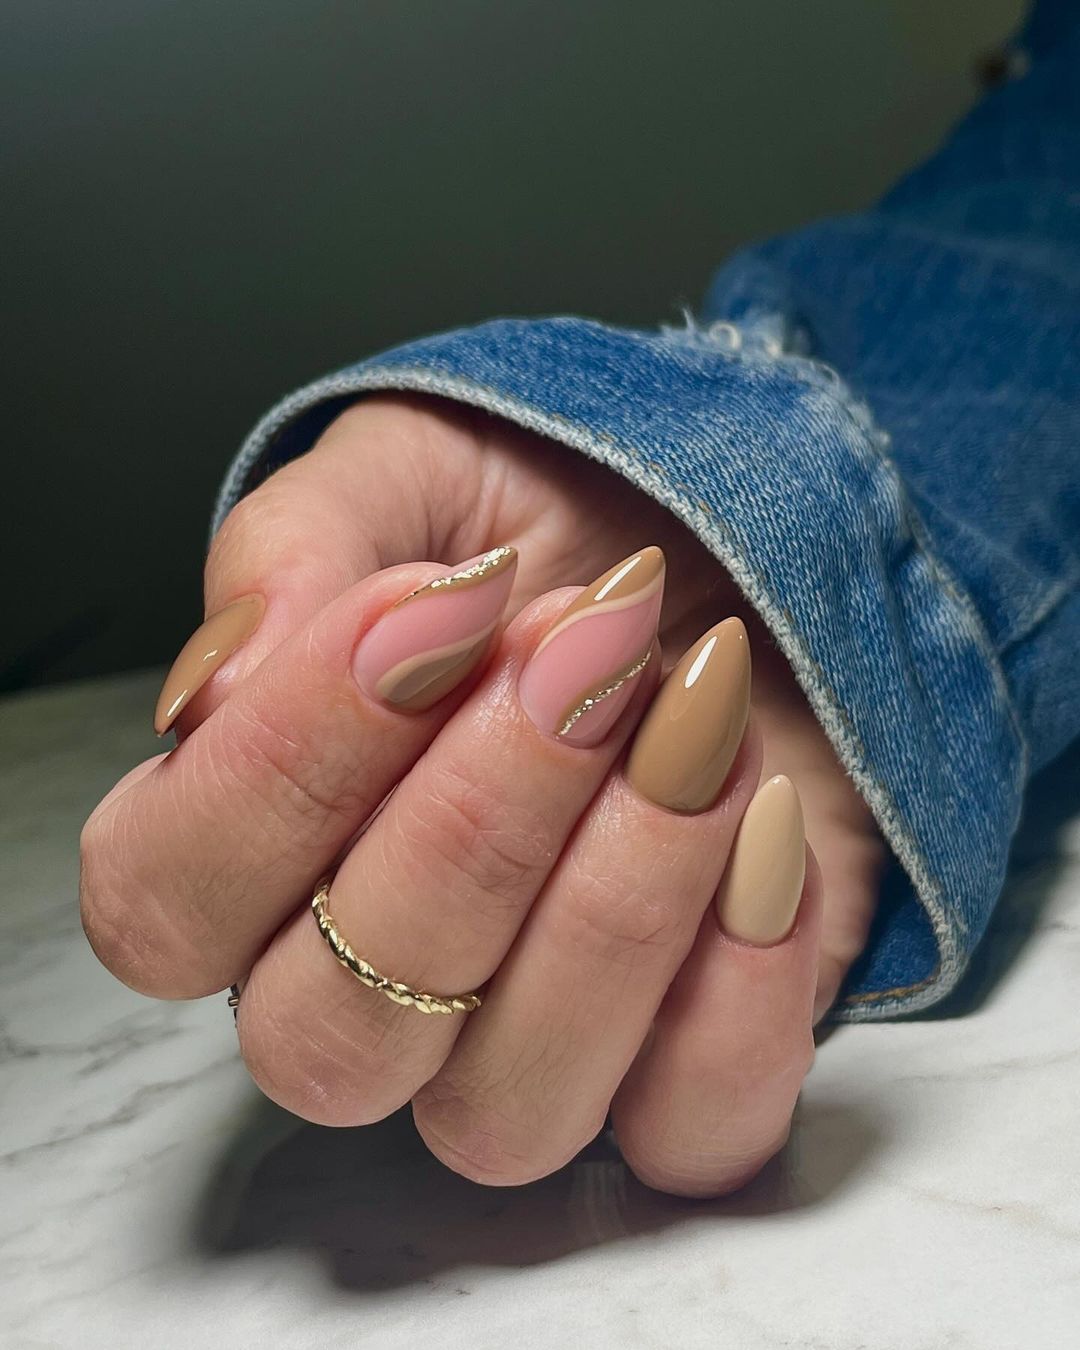 29 Gorgeous Ideas for Fall Almond Nails